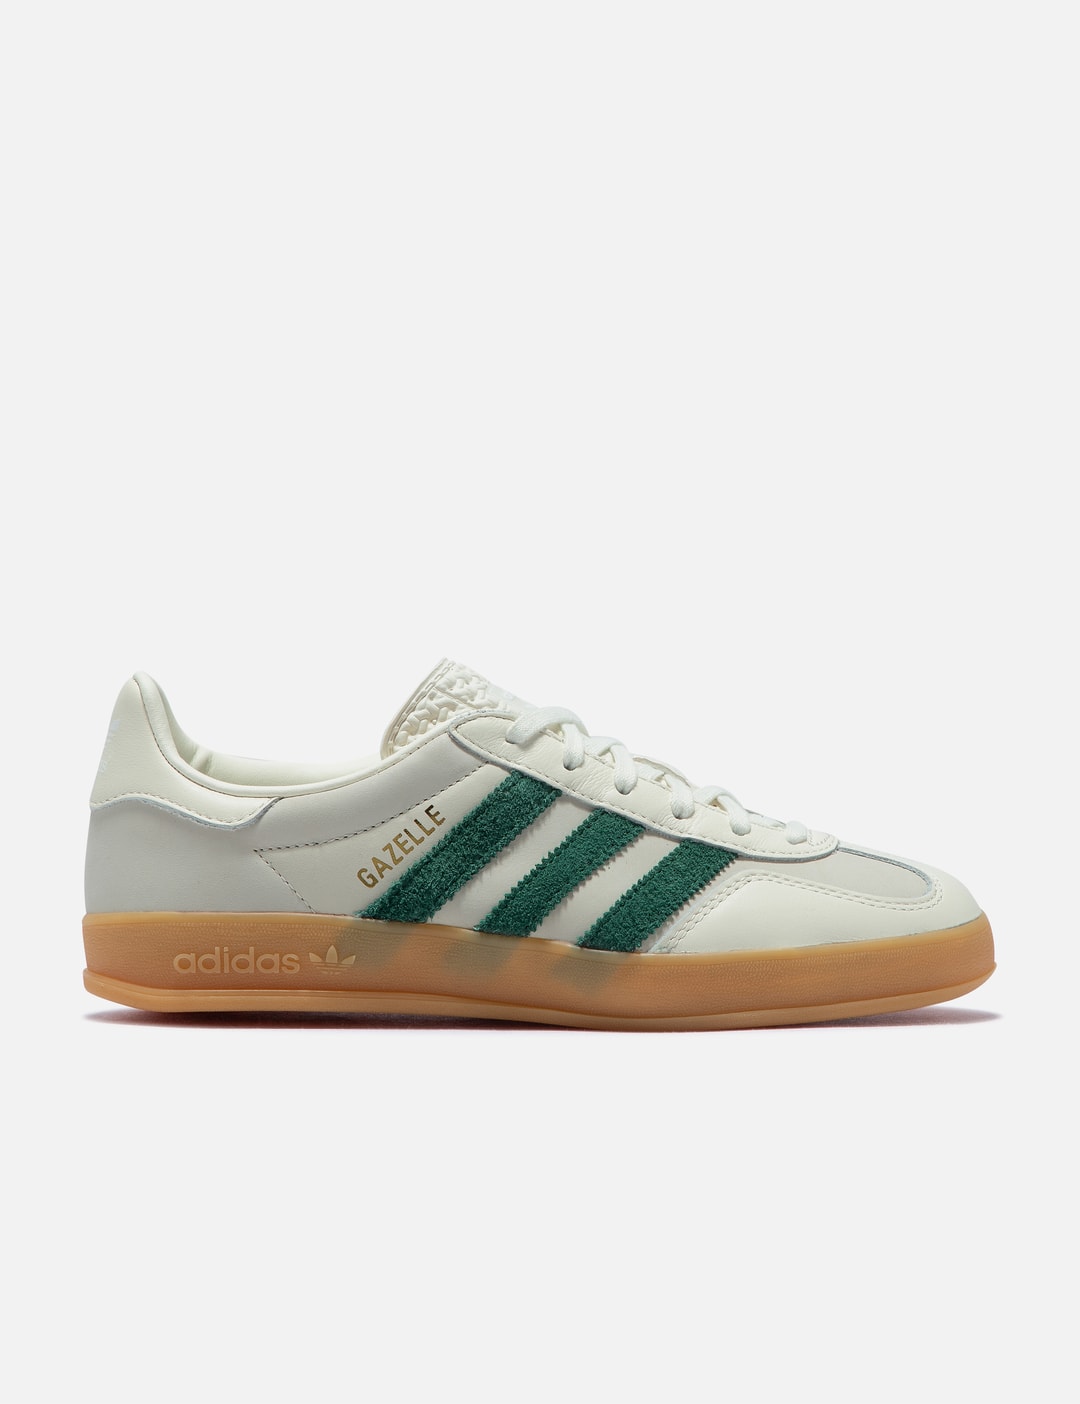 Adidas Originals - GAZELLE INDOOR | HBX - Globally Curated Fashion and ...